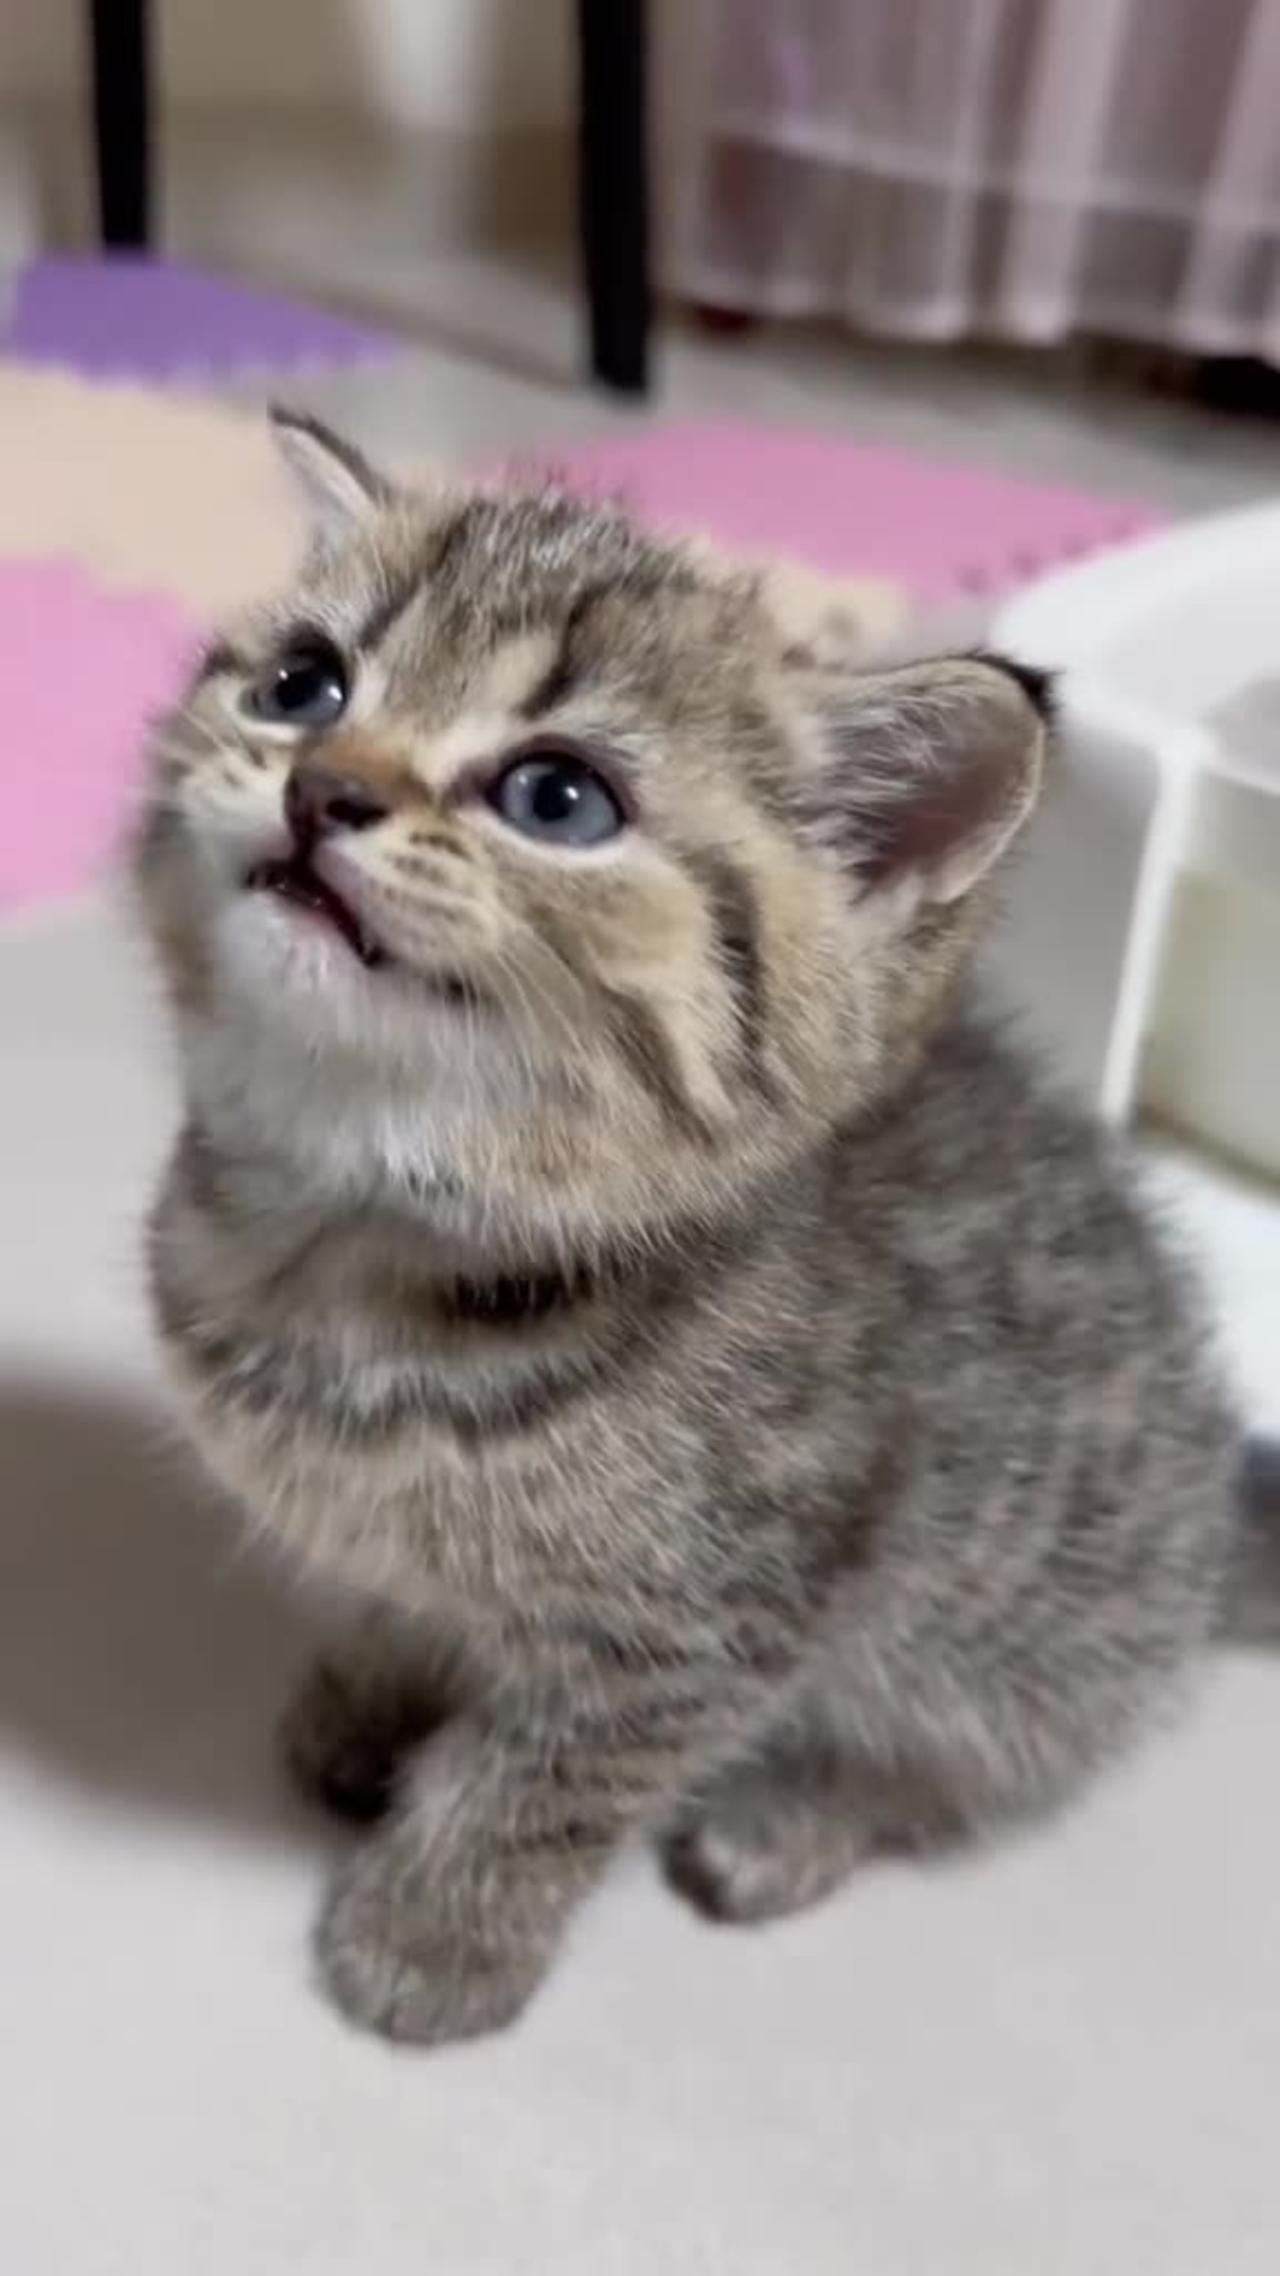 "Precious Kitten Meows for Attention"